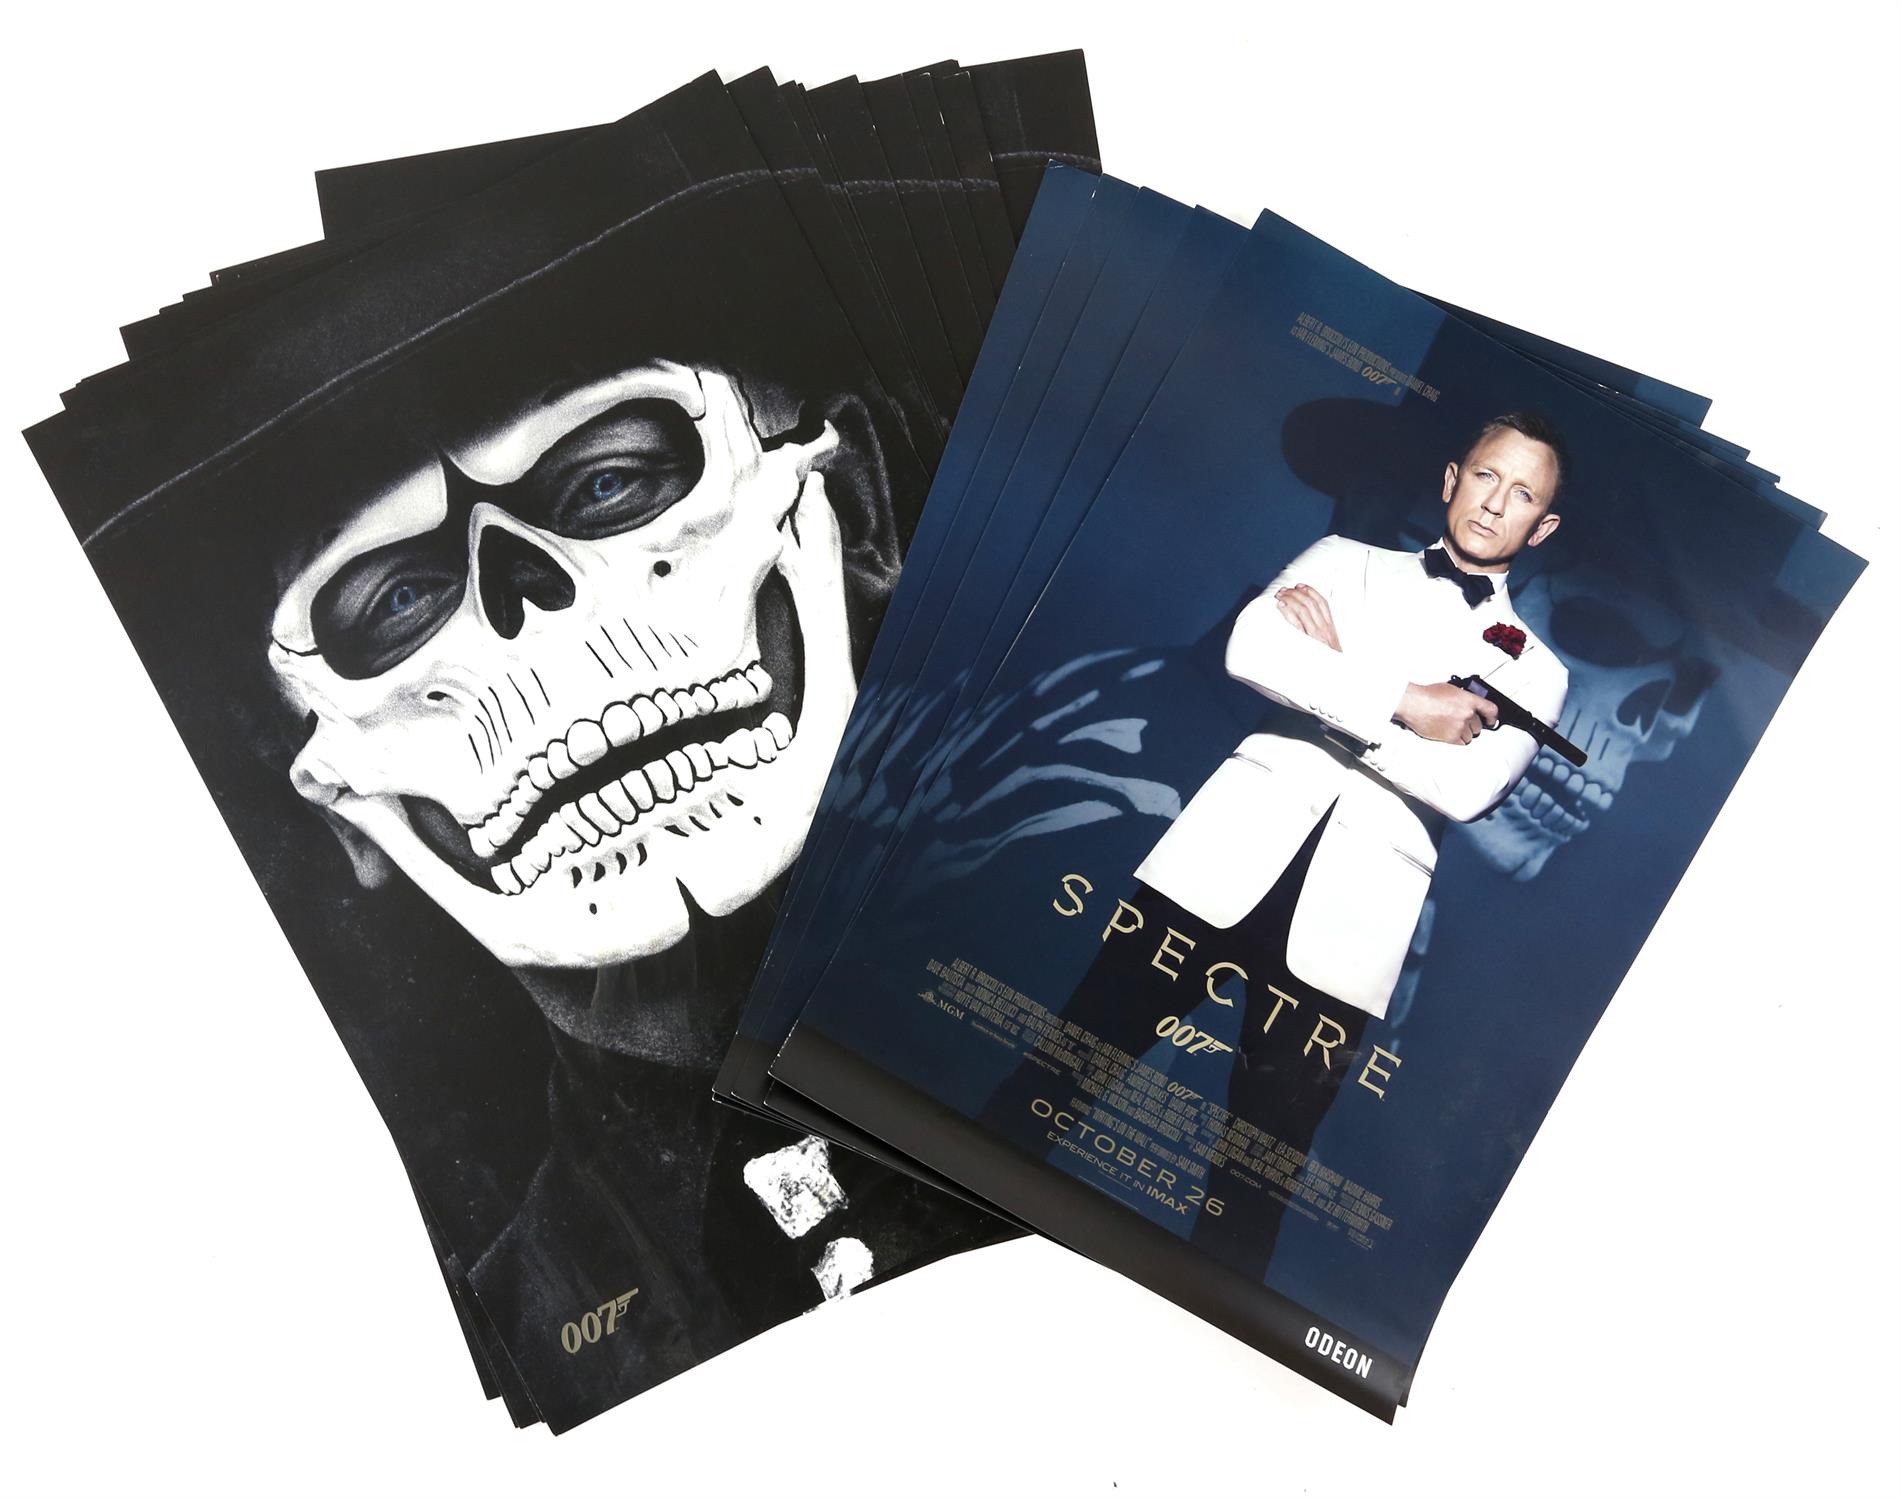 James Bond Spectre (2015) 10 Official Limited release IMAX poster showing an embossed skull on card